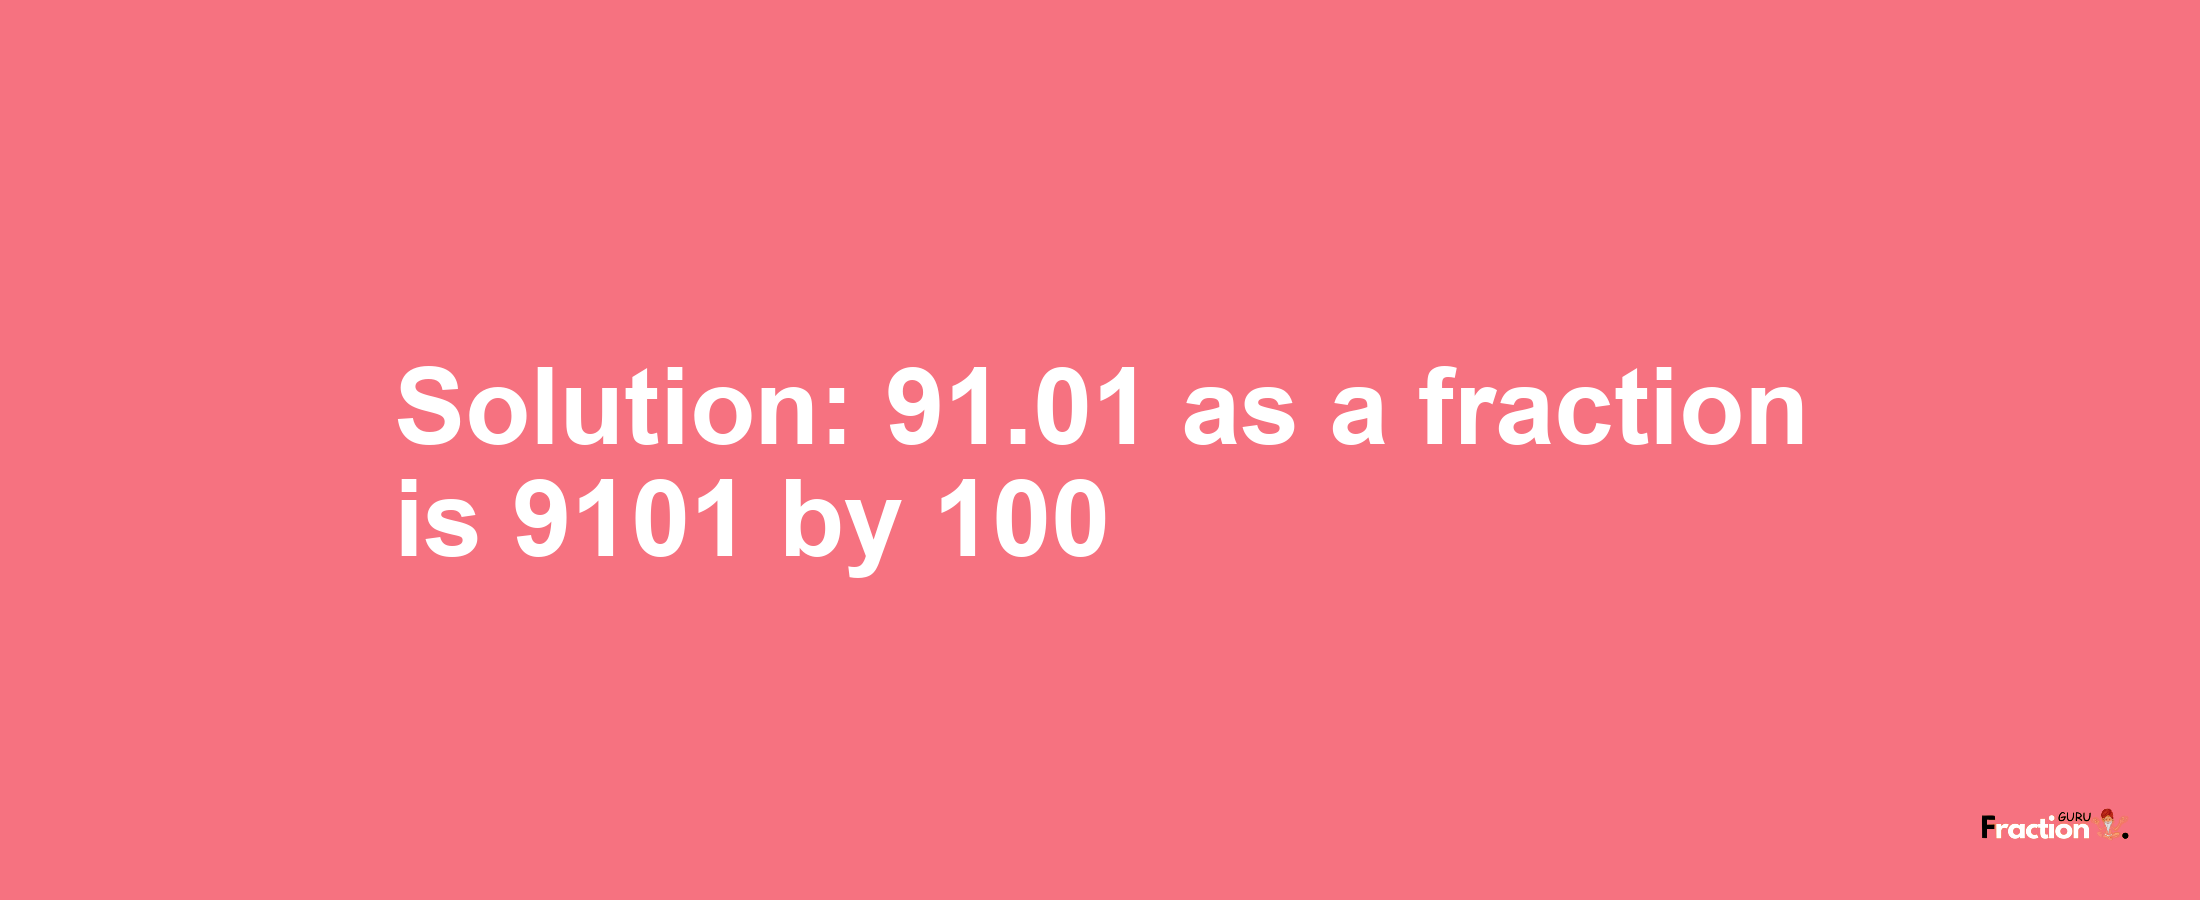 Solution:91.01 as a fraction is 9101/100